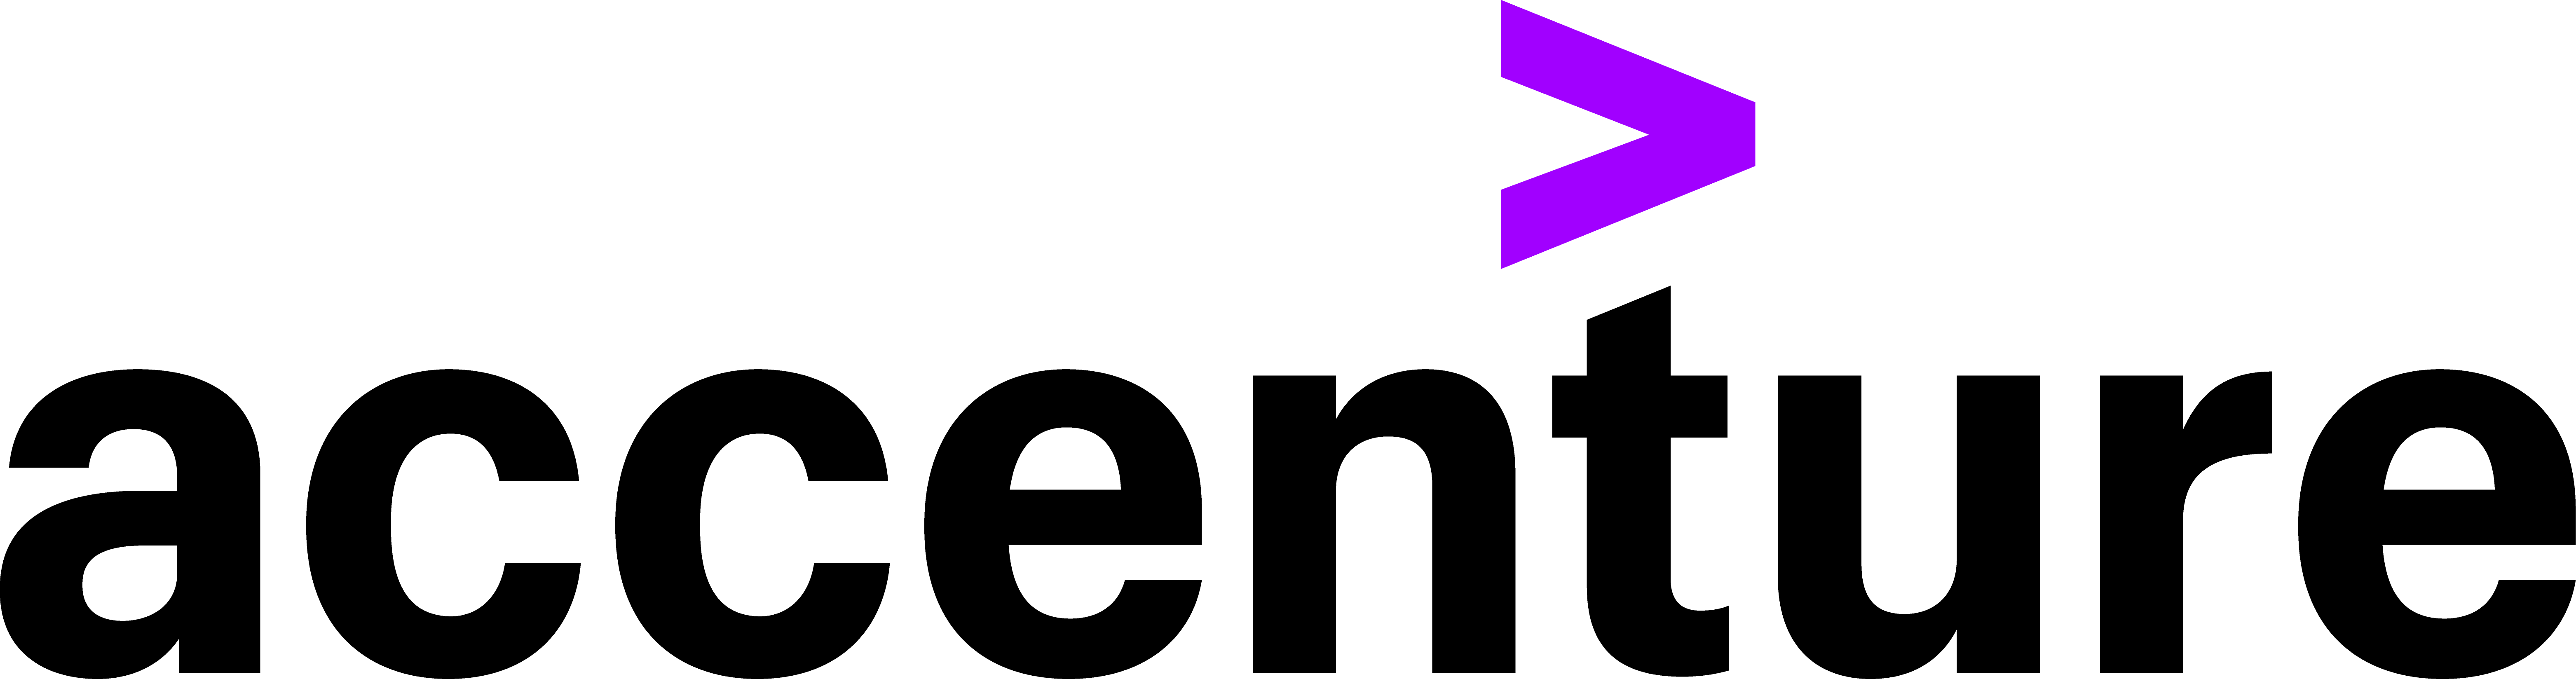 Accenture logo.png